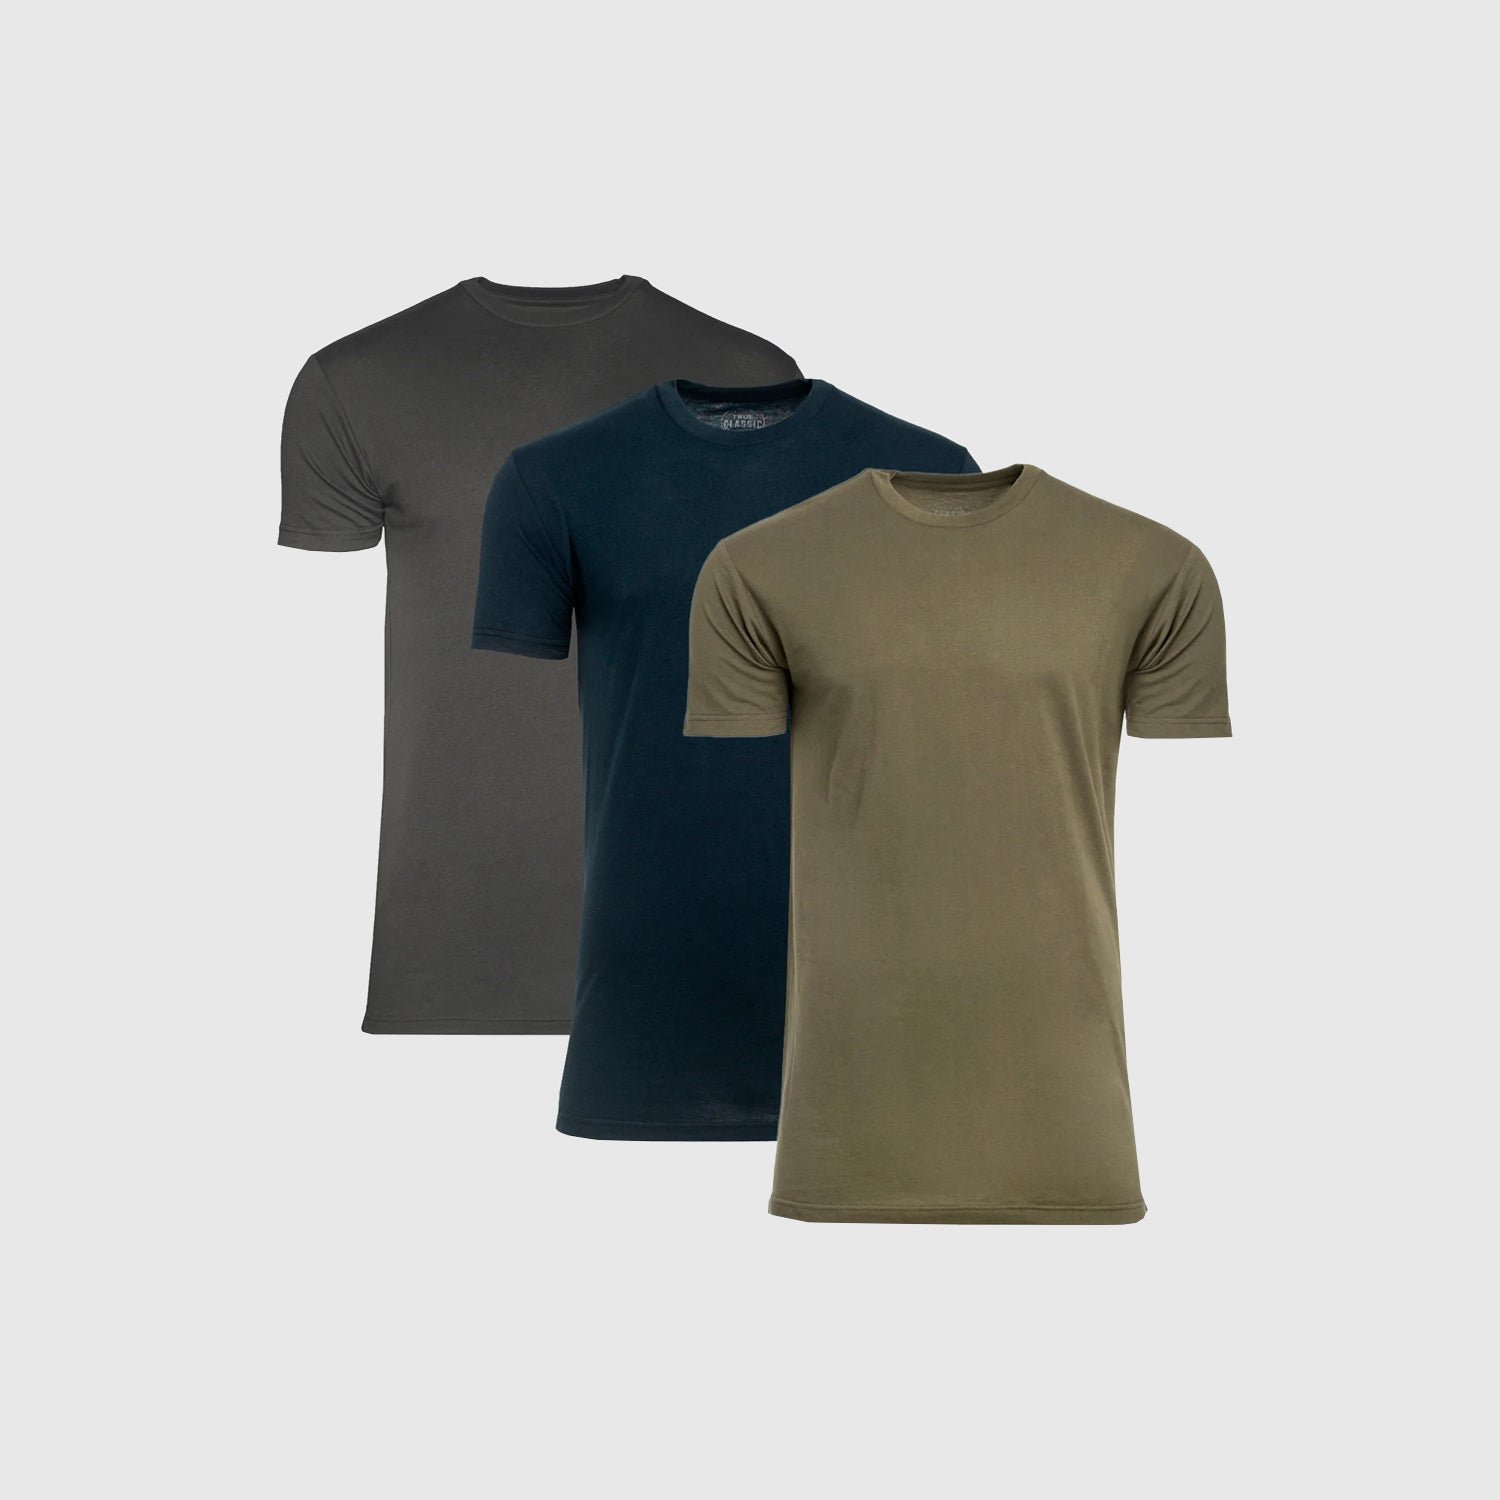 The Tall Round Hem Crew Neck T-Shirt Color 3-Pack